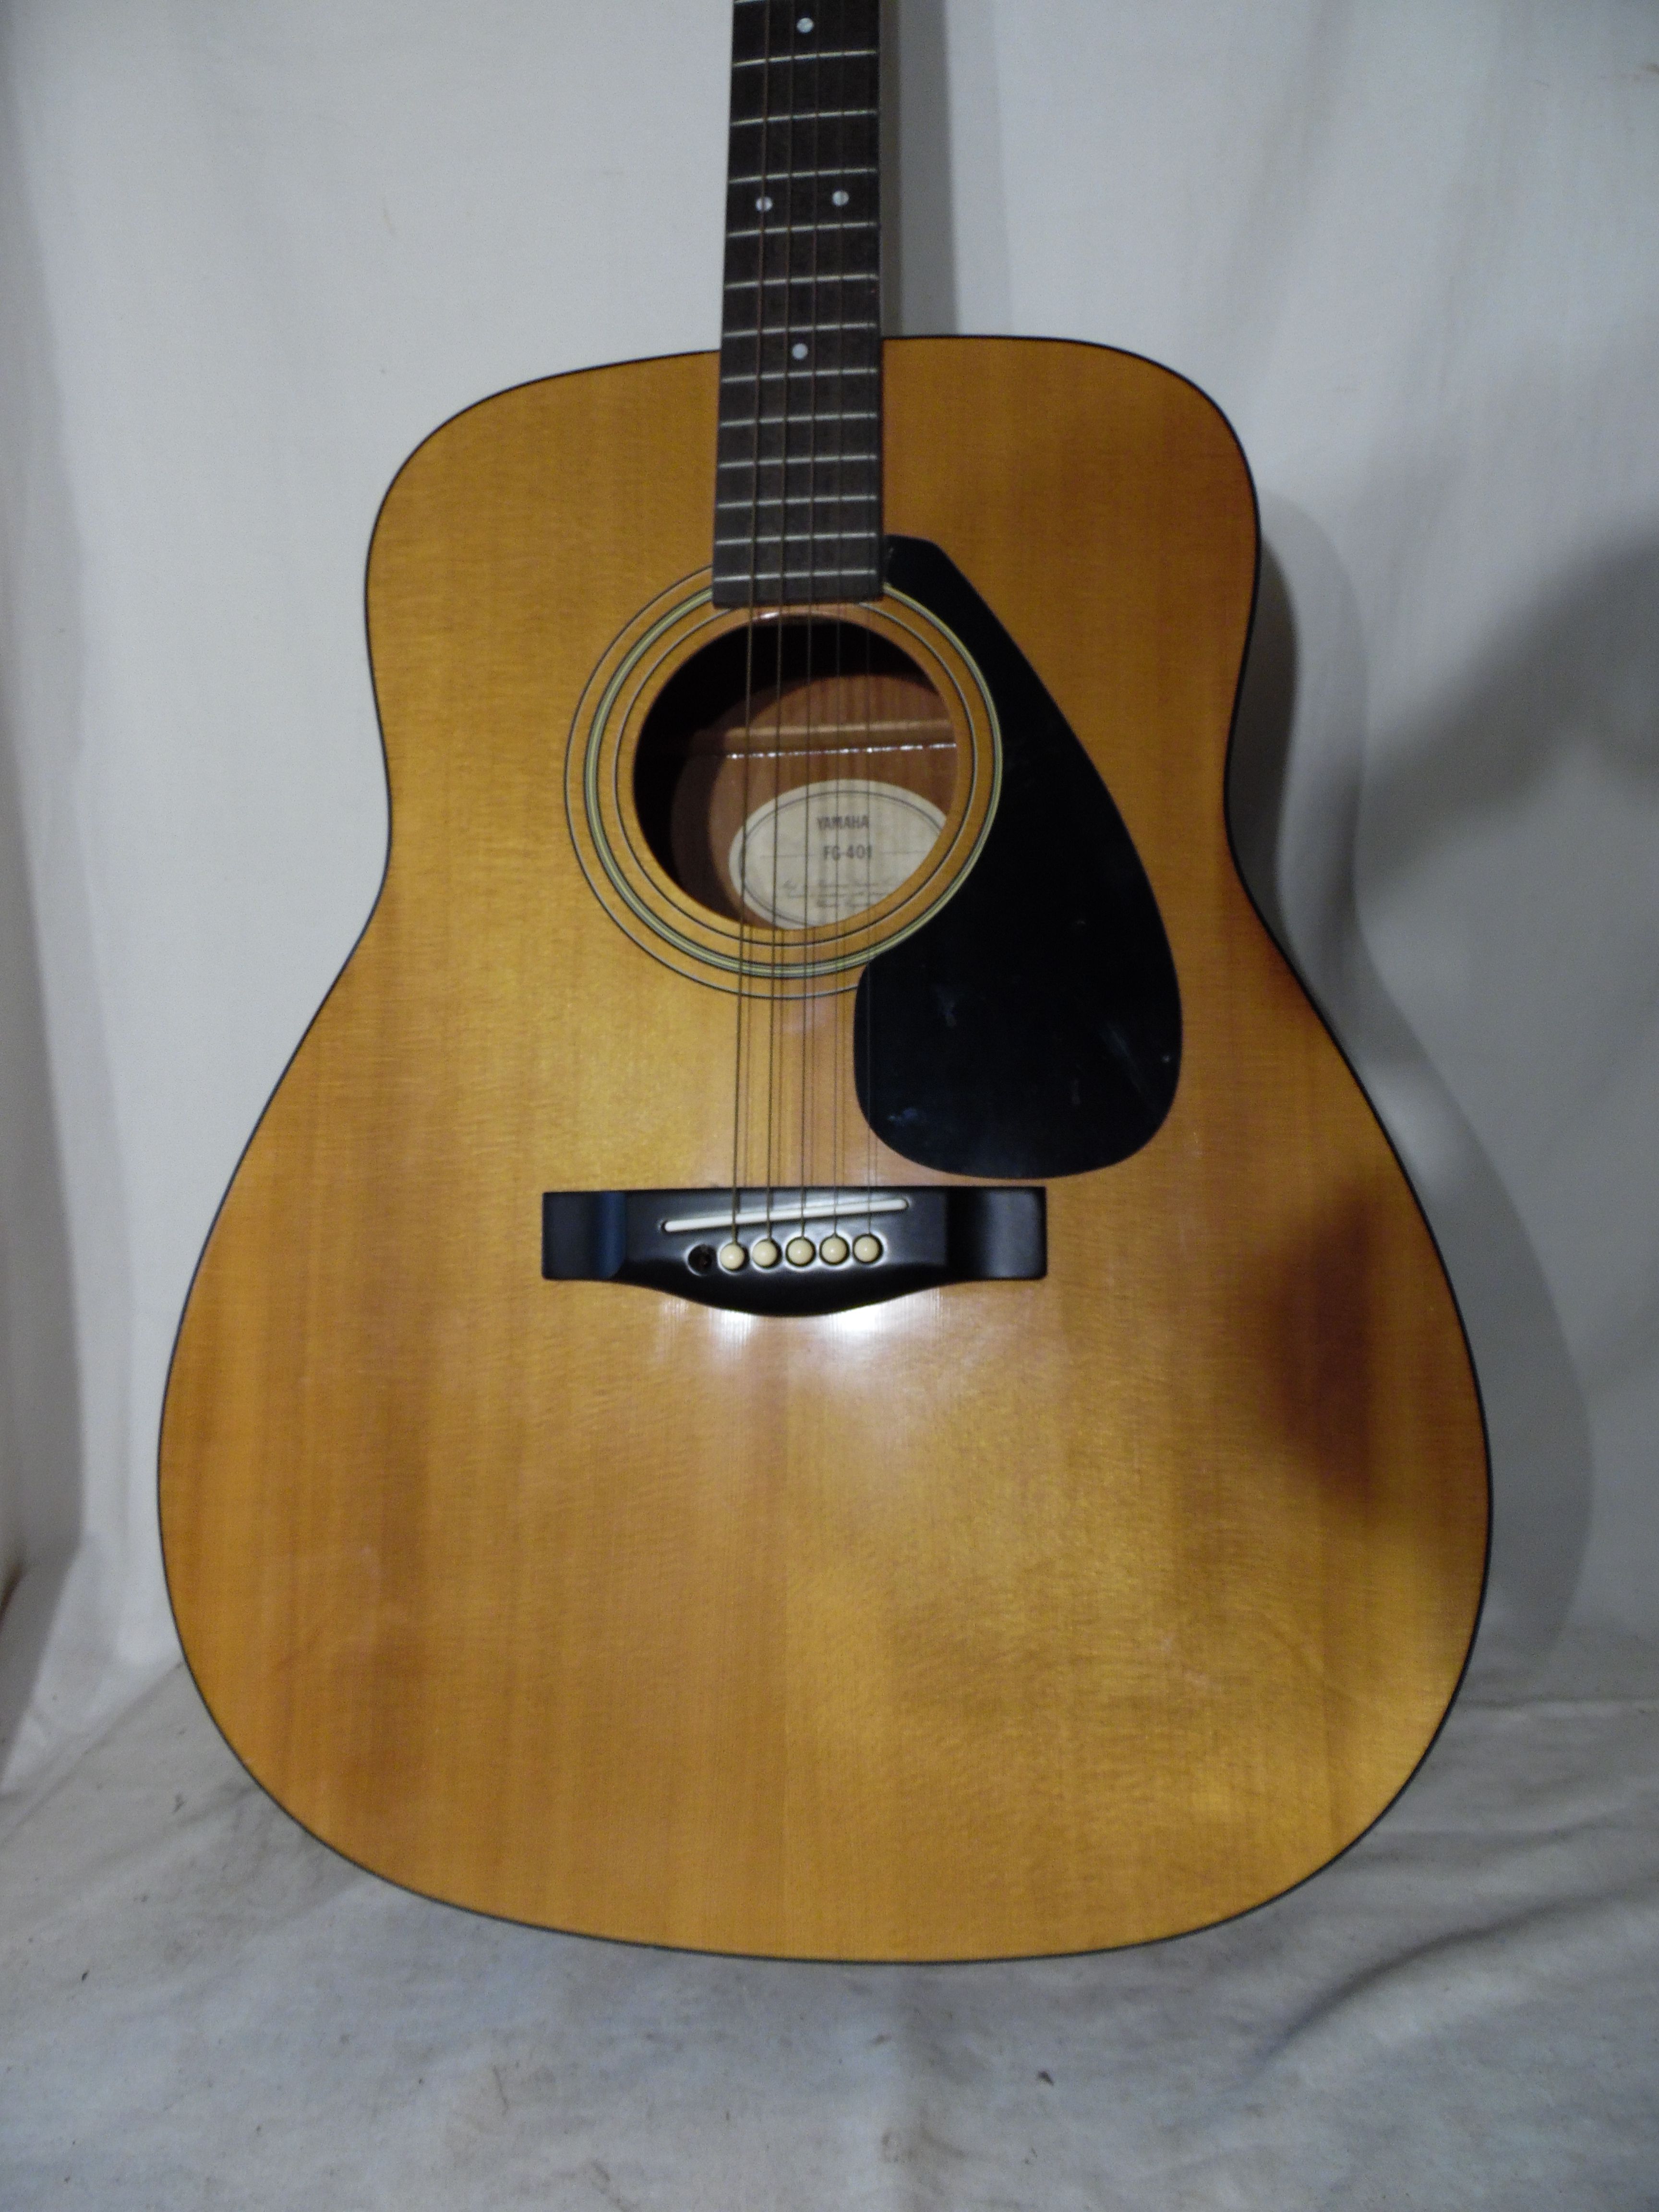 YAMAHA FG-401 Vintage Classic Acoustic Guitar 6 Strings Right Hand Taiwan